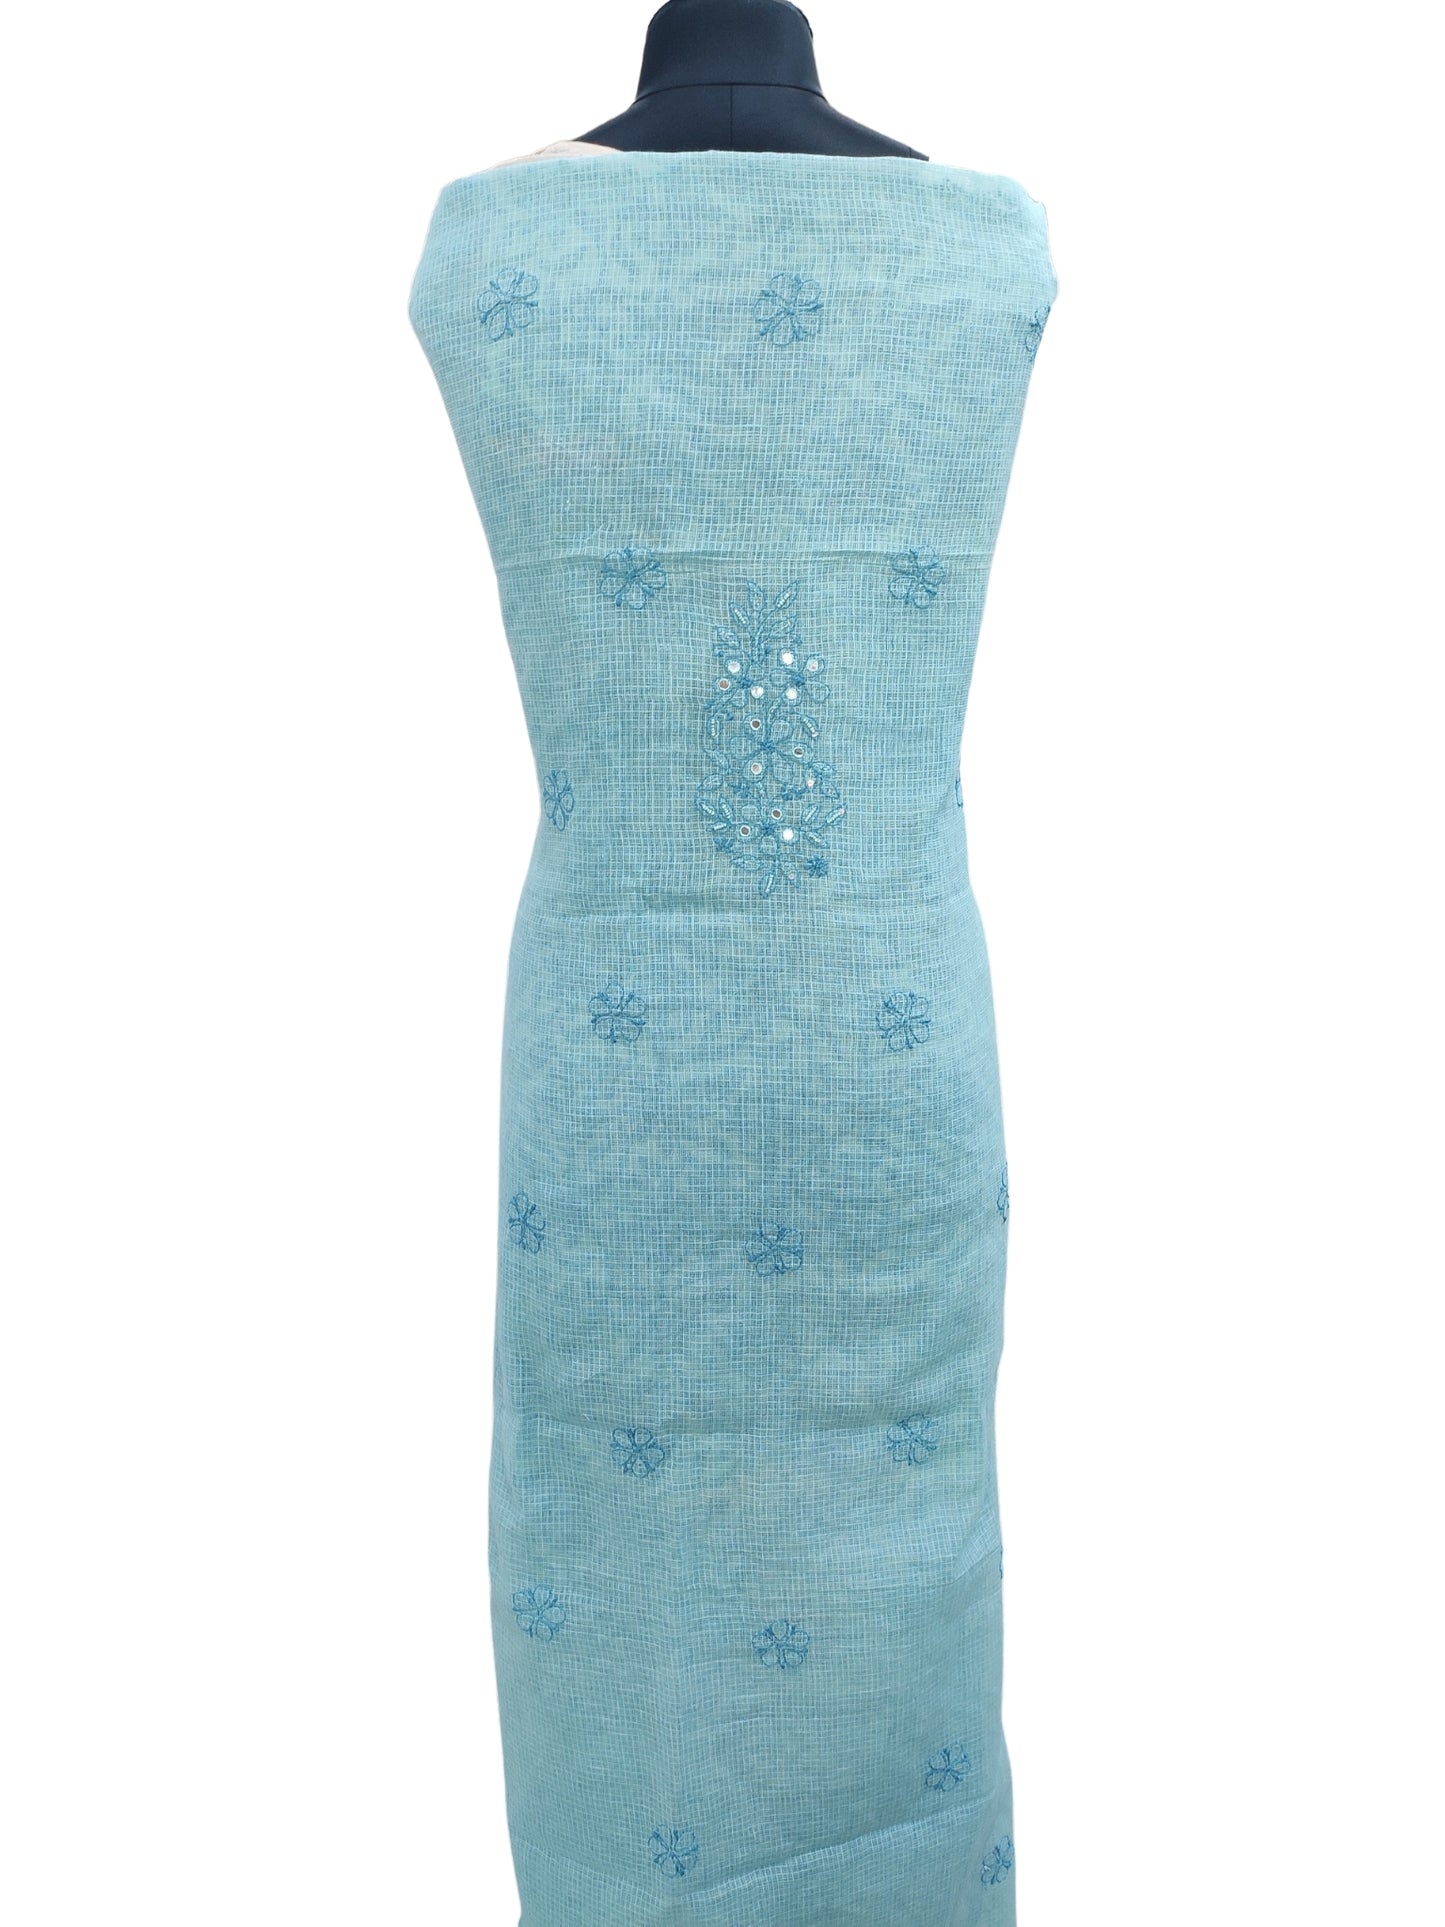 Shyamal Chikan Hand Embroidered Blue Kota Cotton Lucknowi Chikankari Unstitched Kurta Piece With Mirror and Pearl Work - S11731